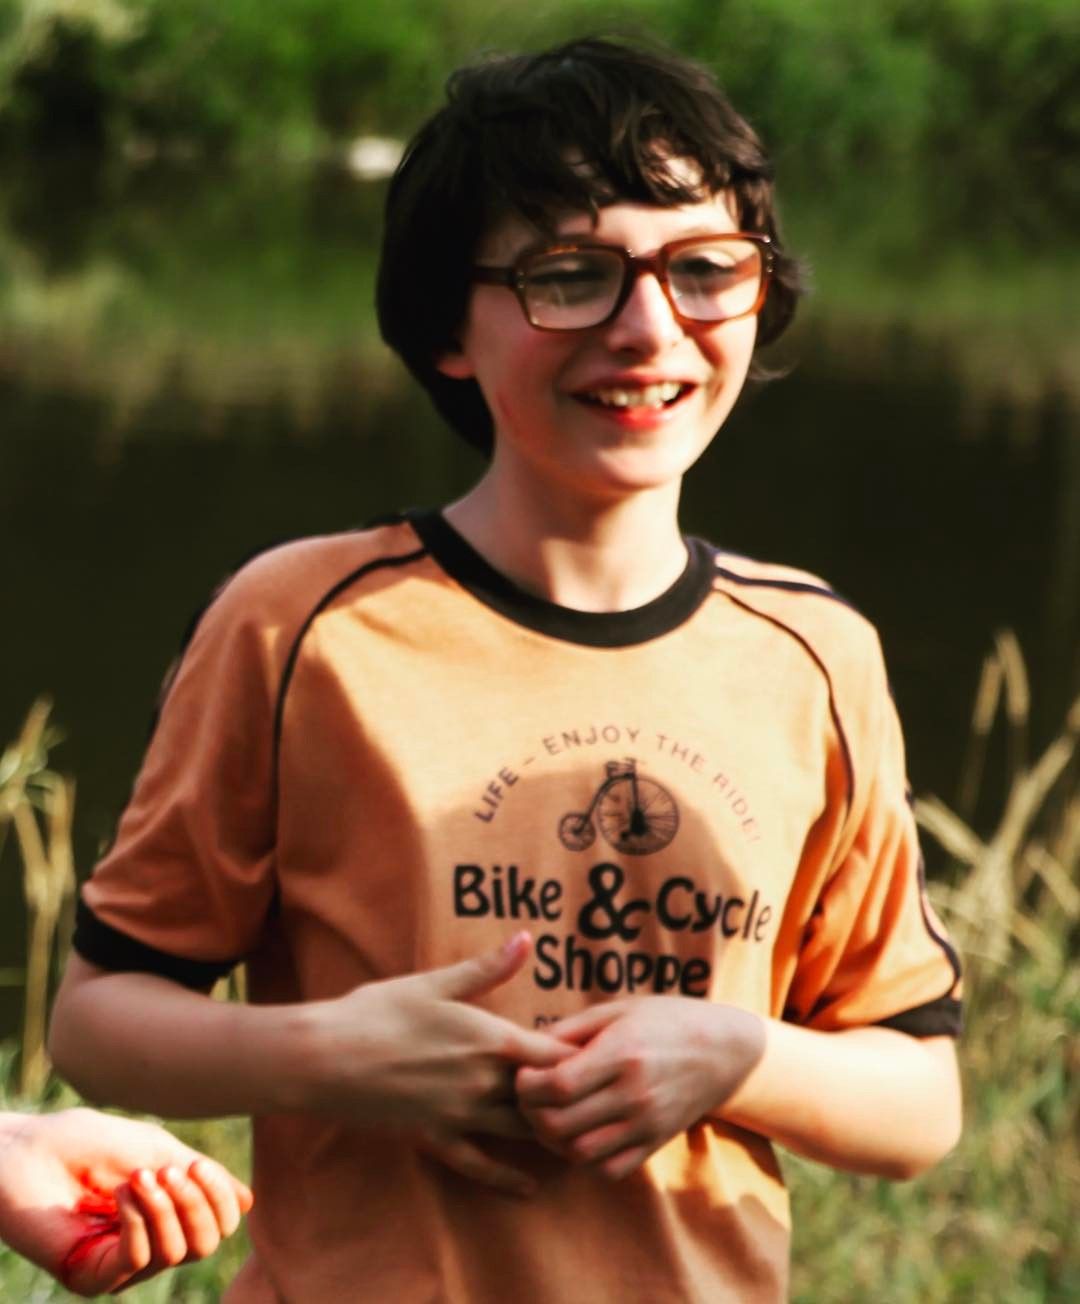 Finn Wolfhard as Richie Tozier in Stephen King's It Remake